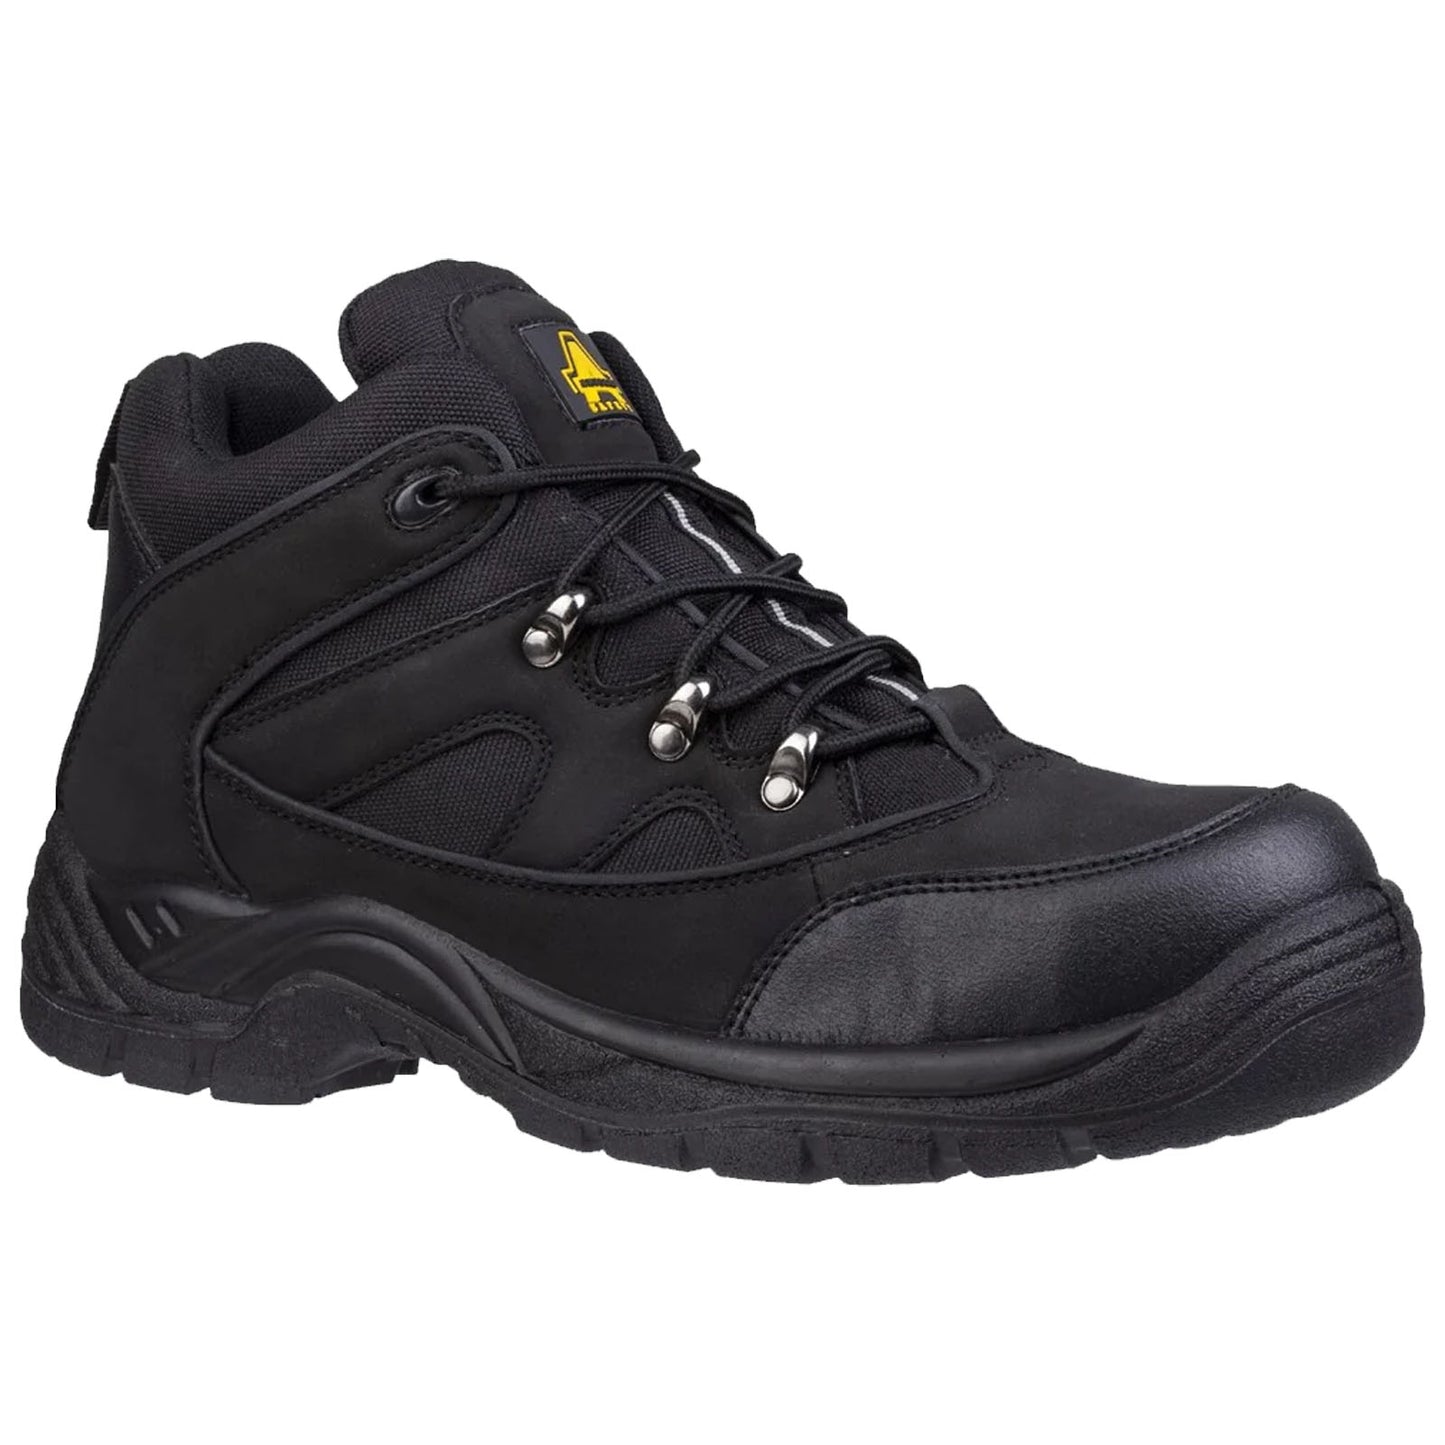 Amblers FS151 Safety Boots